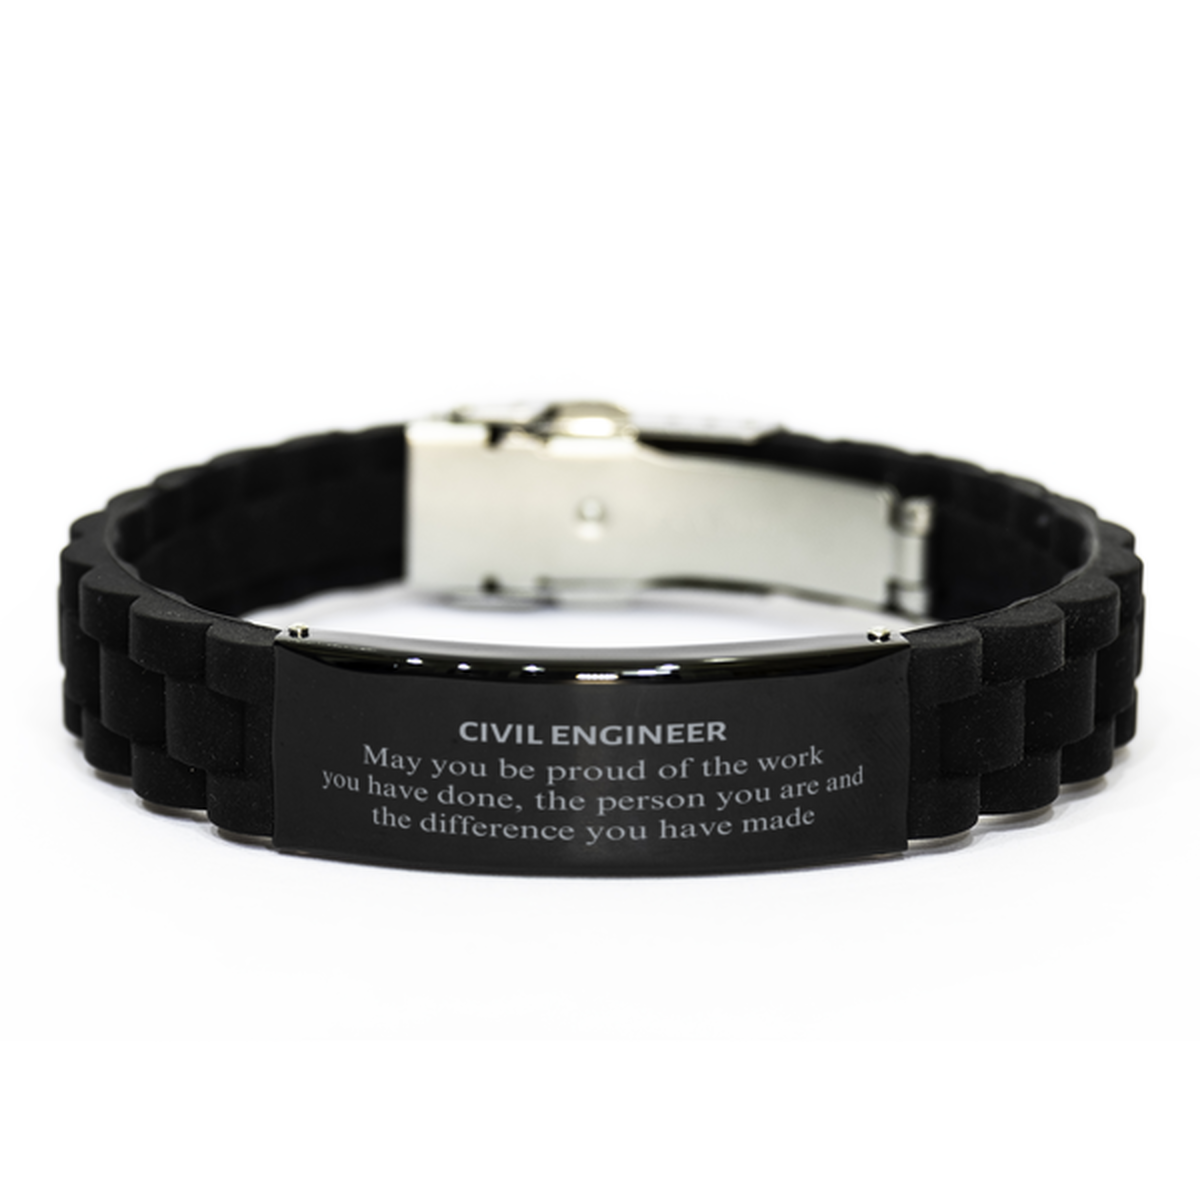 Civil Engineer May you be proud of the work you have done, Retirement Civil Engineer Black Glidelock Clasp Bracelet for Colleague Appreciation Gifts Amazing for Civil Engineer